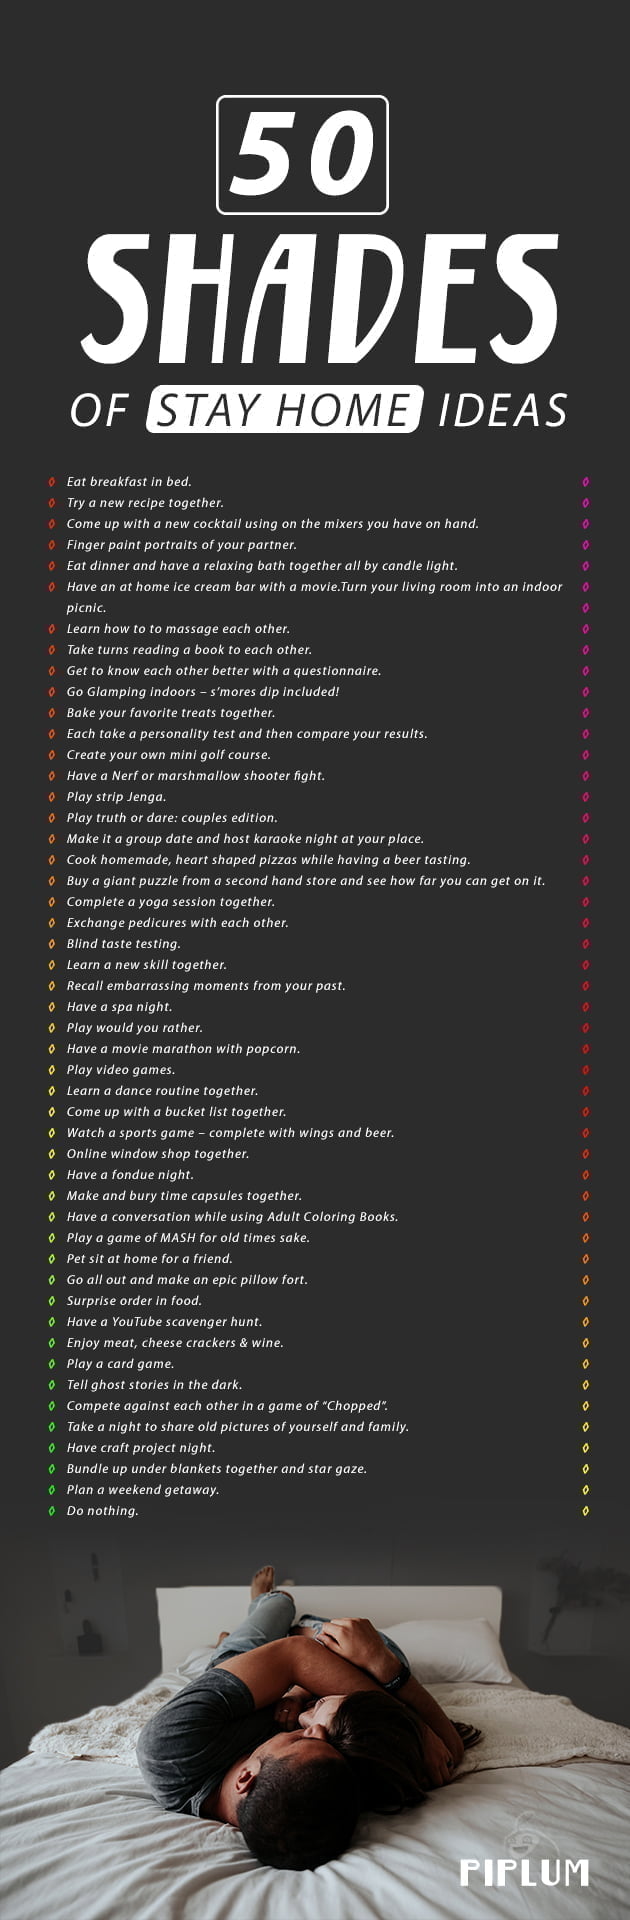 50-shades-of-stay-home-ideas-Motivational-Poster-what-to-do-list